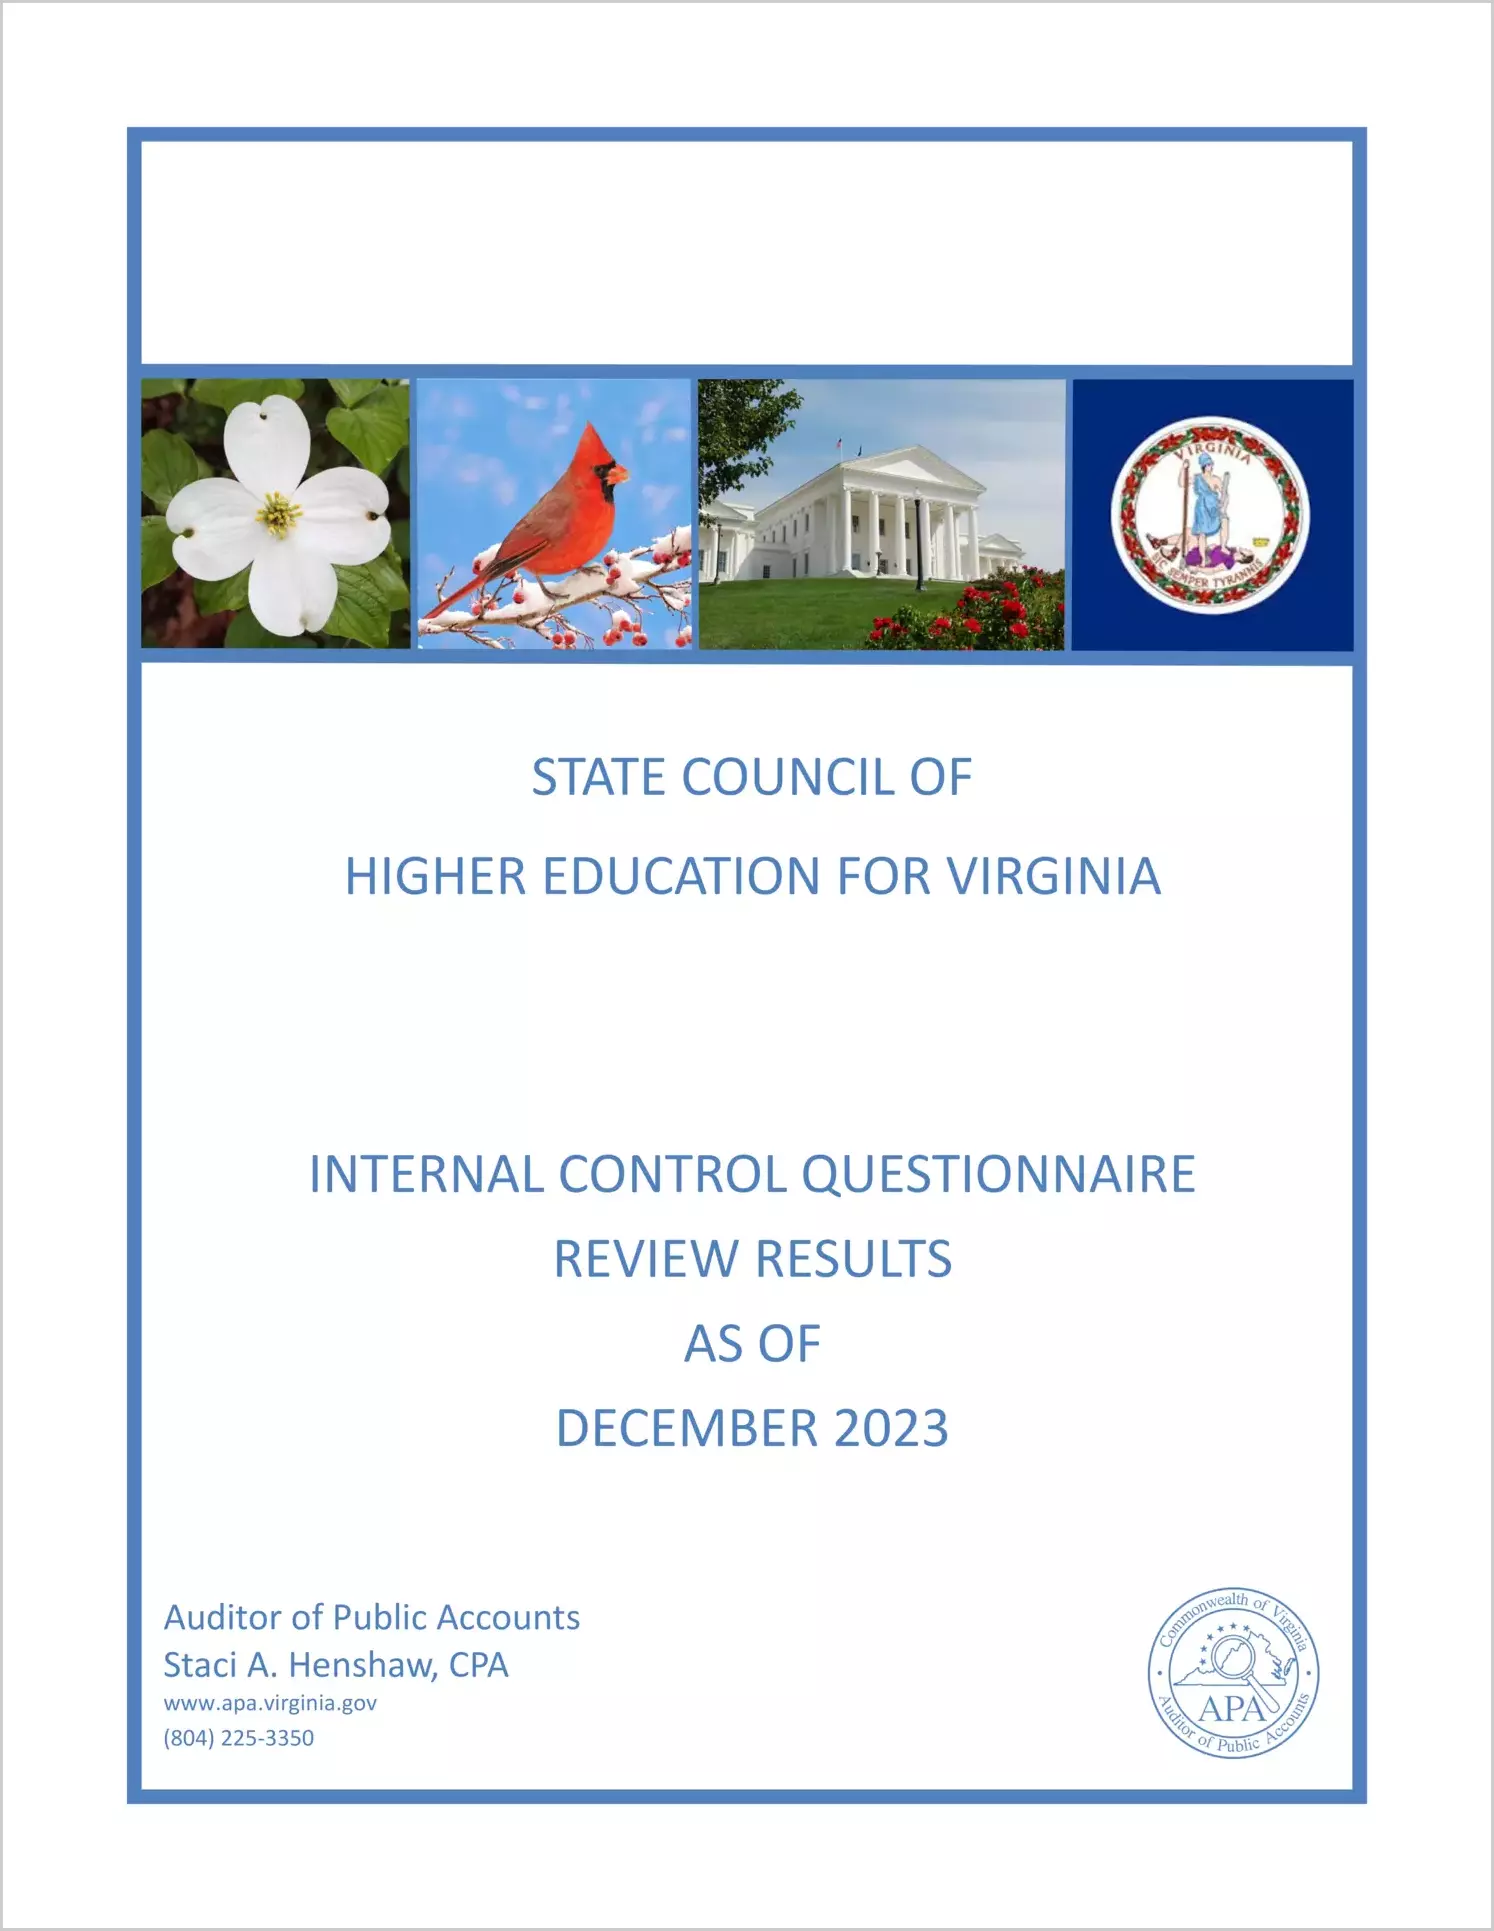 State Council of Higher Education for Virginia Internal Control Questionnaire Review Results as of December 2023